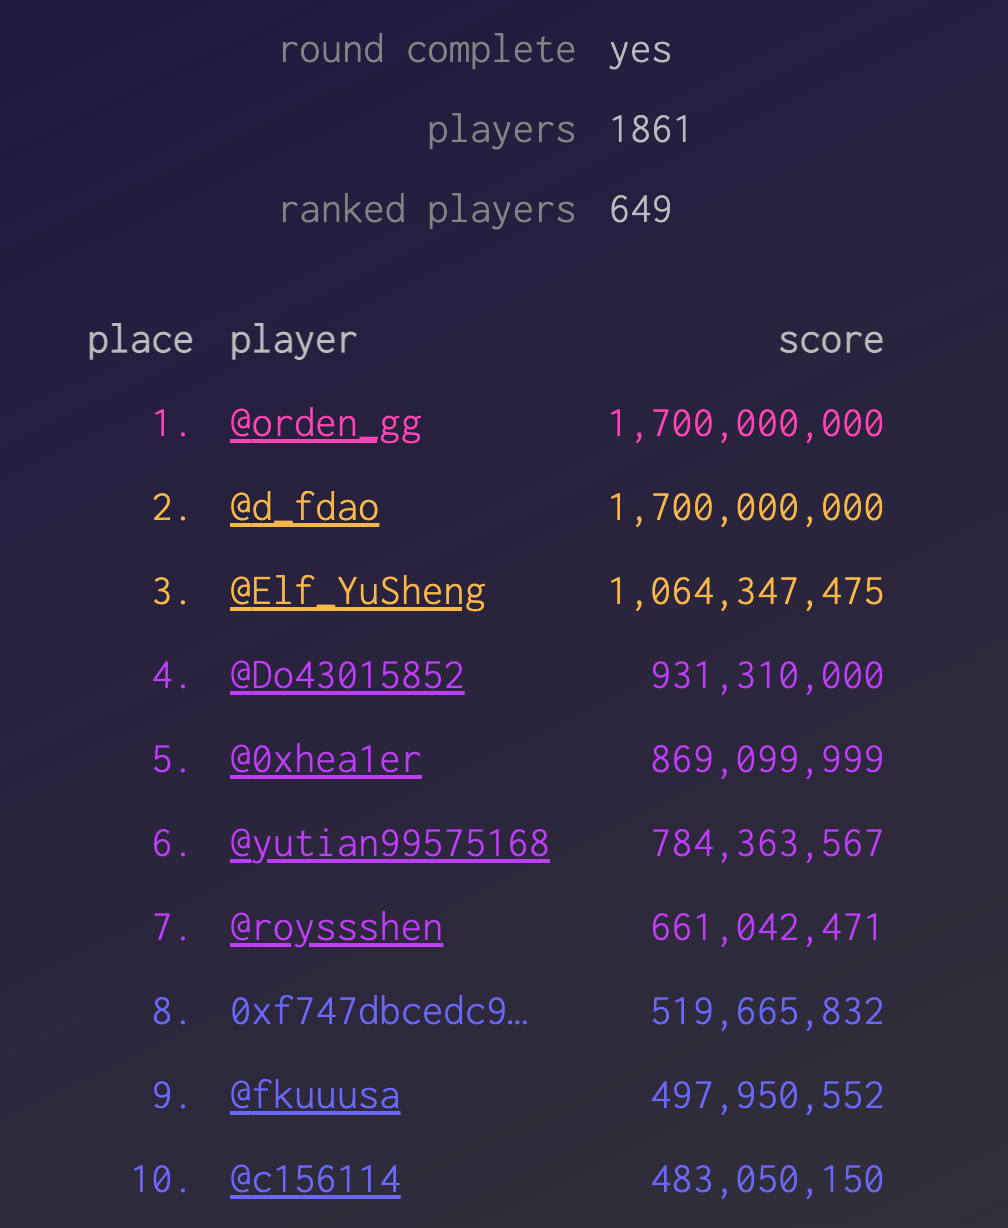 Making the “top 10” on the leaderboard for the game, Dark Forest, is just about one of the highest honors you can achieve as a Solidity developer today. (via: https://zkga.me/)